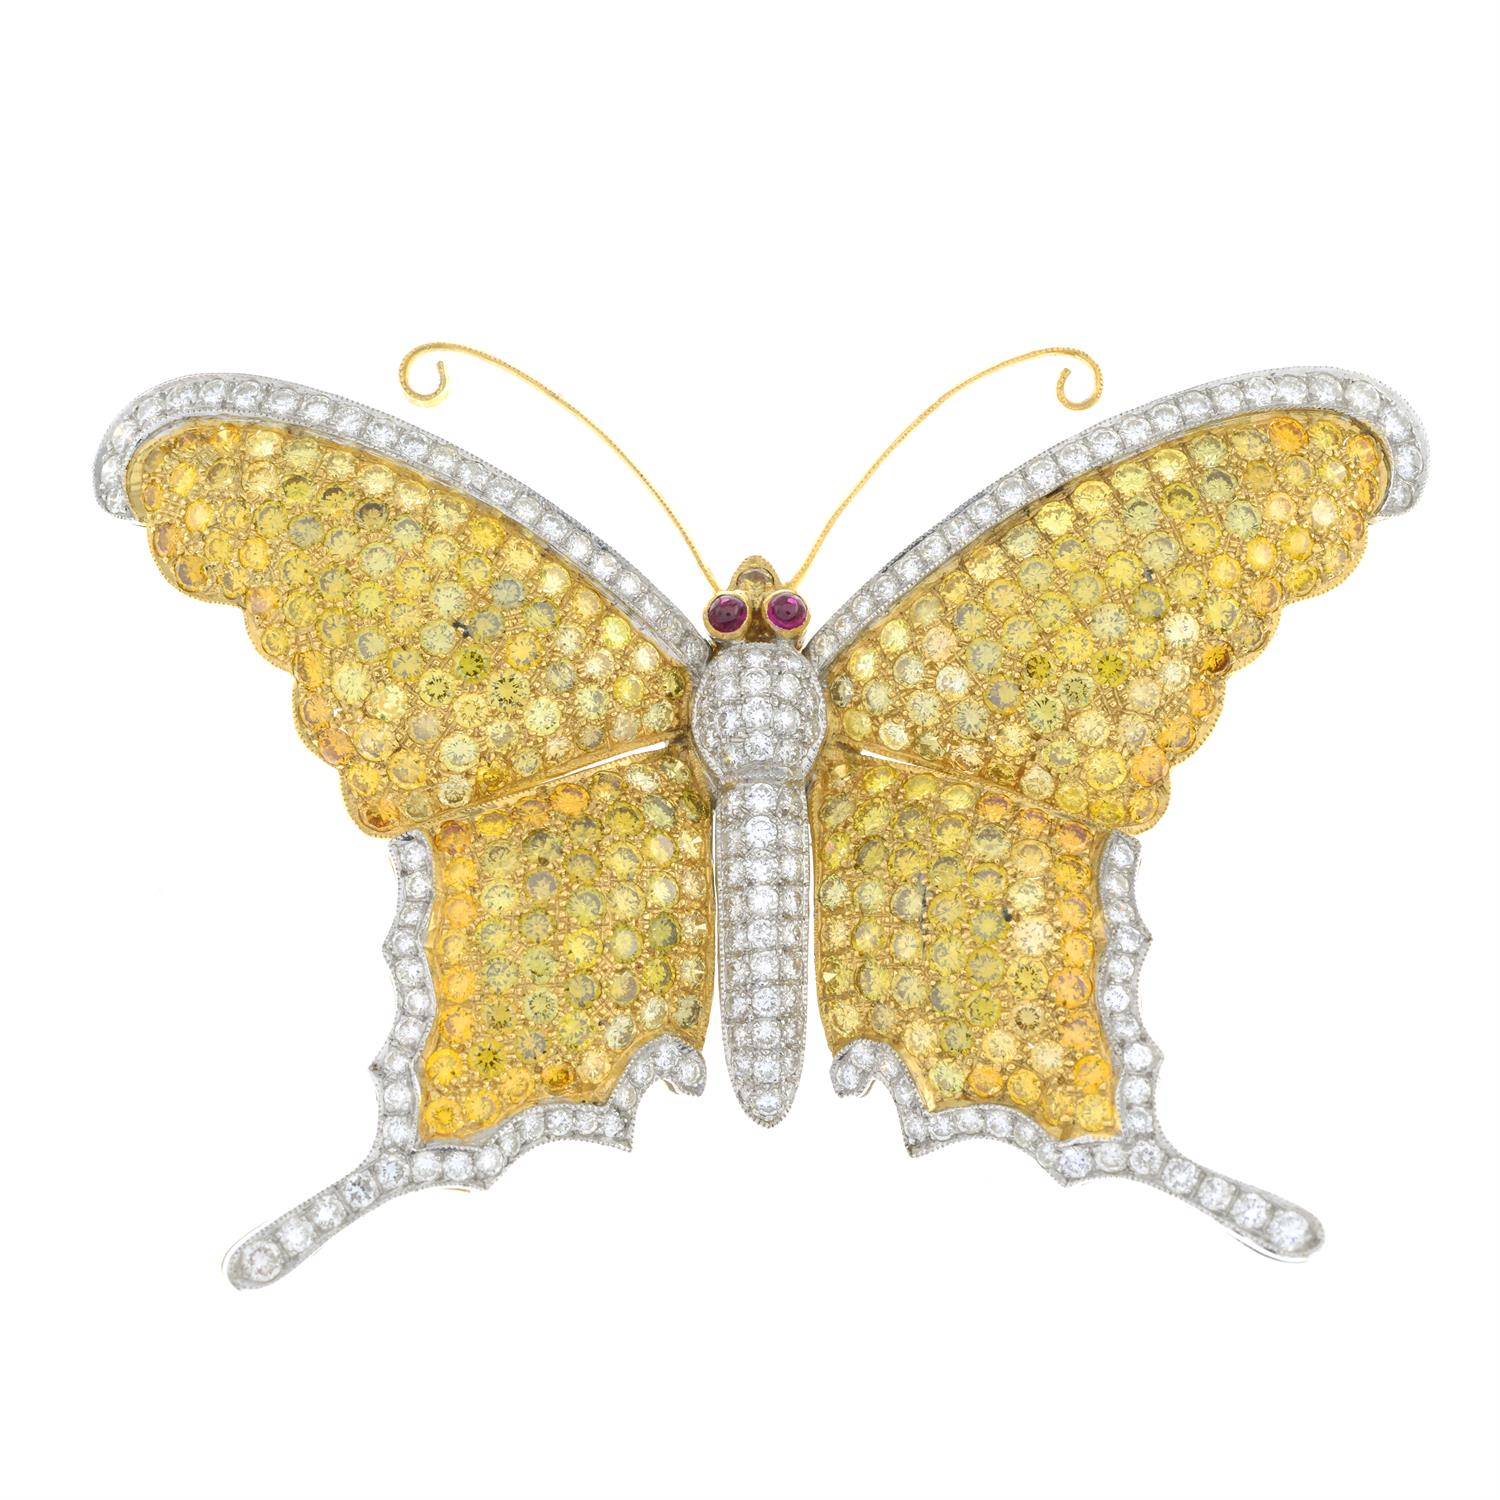 Diamond and 'yellow' diamond butterfly brooch - Image 2 of 6